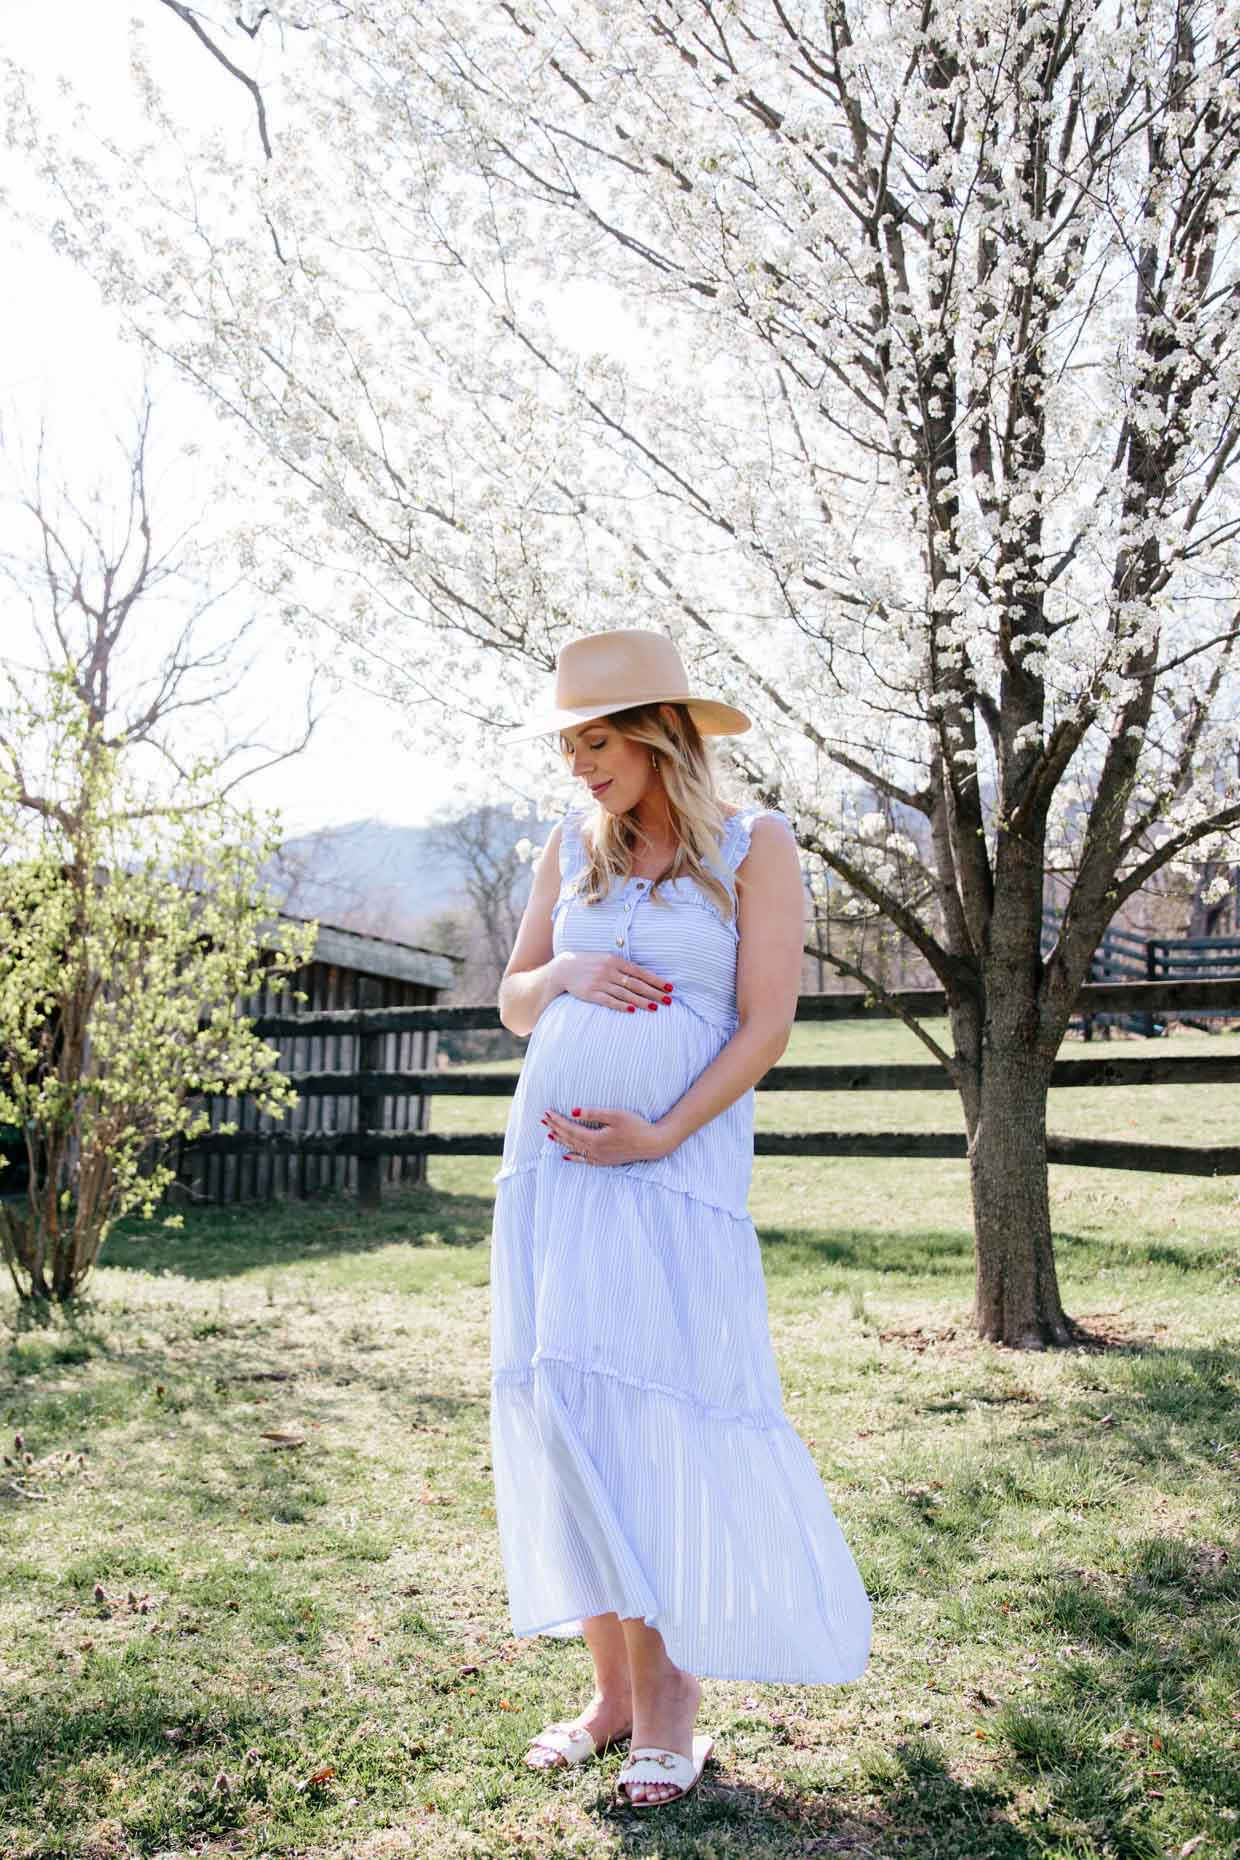 https://www.meagansmoda.com/wp-content/uploads/2021/04/Meagan-Brandon-fashion-blogger-of-Meagans-Moda-shares-spring-maternity-outfit-idea-in-blue-striped-maxi-dress-and-Janessa-Leone-straw-fedora-hat.jpg